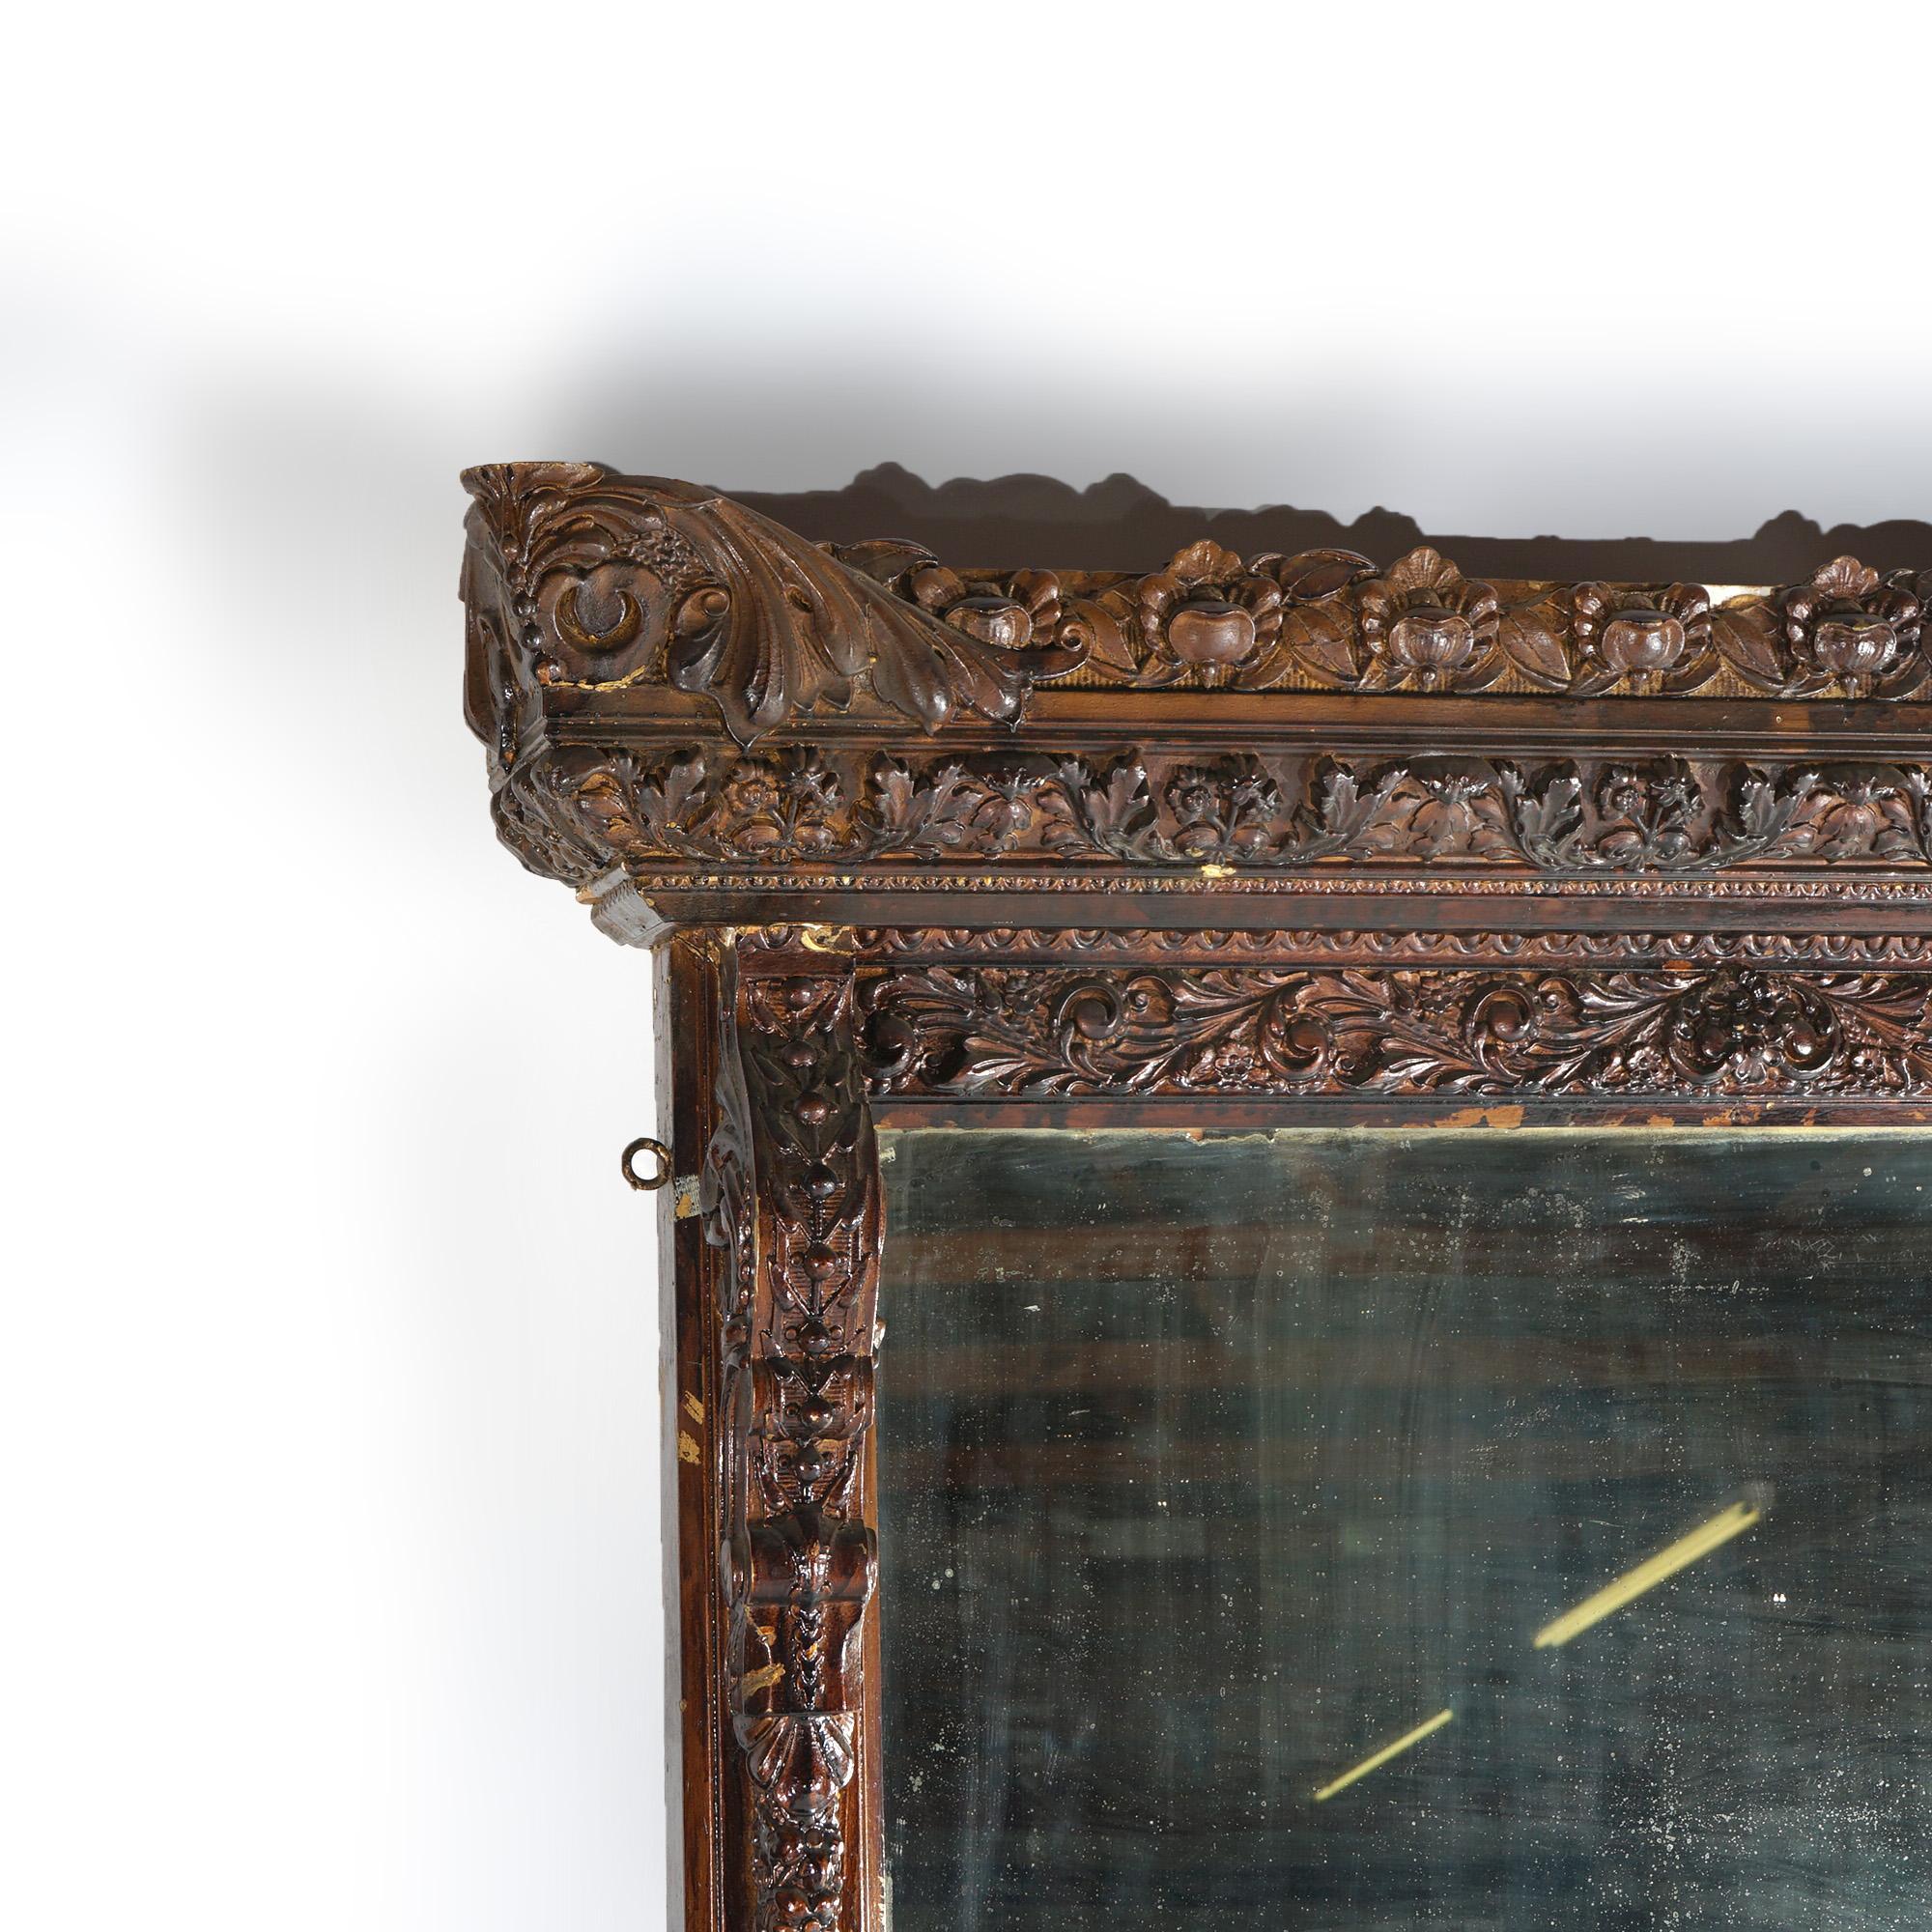 Antique Renaissance Revival Heavily Carved Wood & Gesso Over Mantle Mirror 19thC In Good Condition For Sale In Big Flats, NY